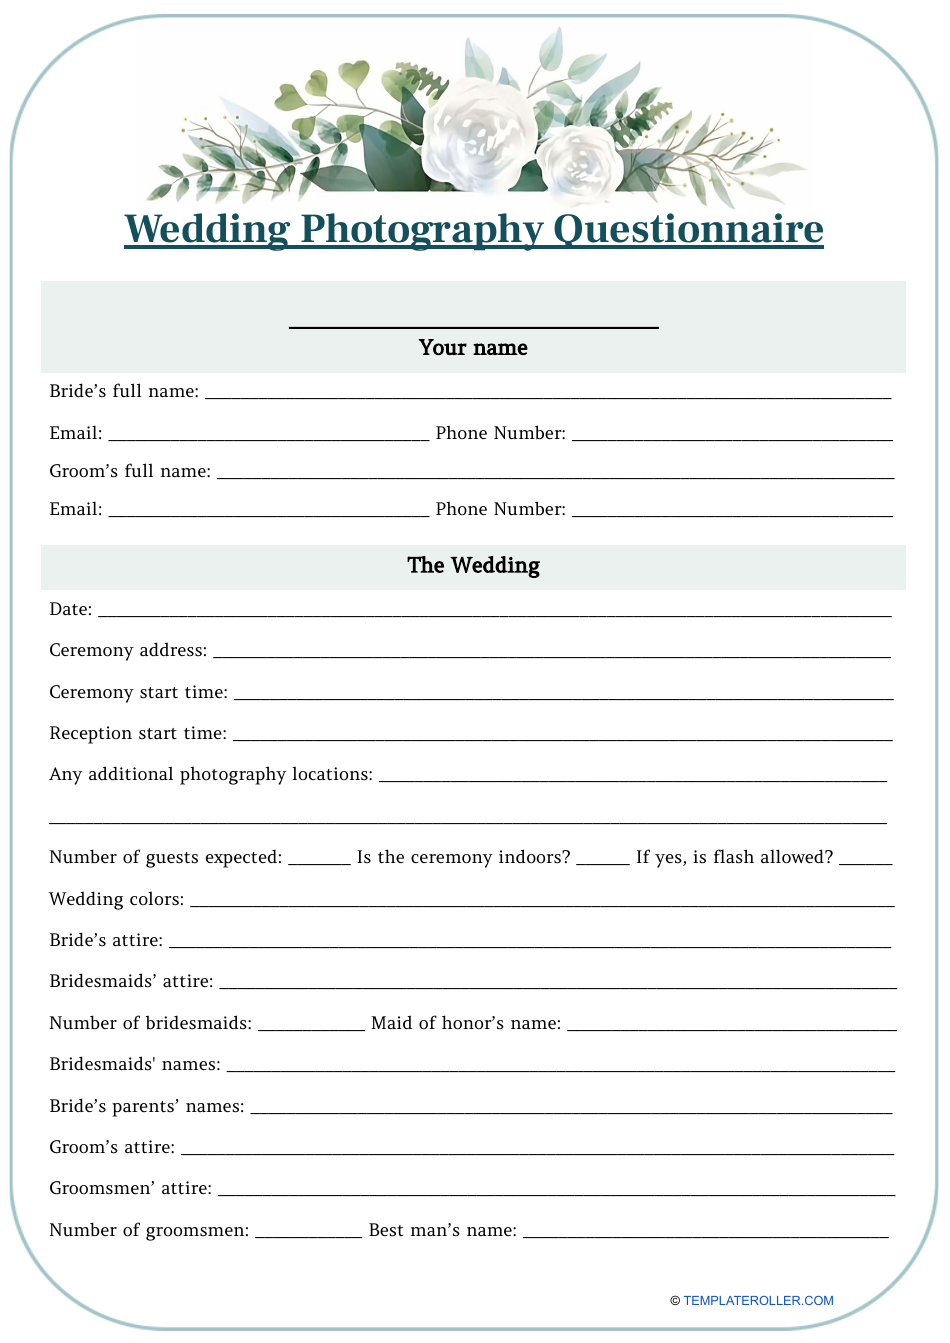 Wedding Photography Questionnaire Template Preview